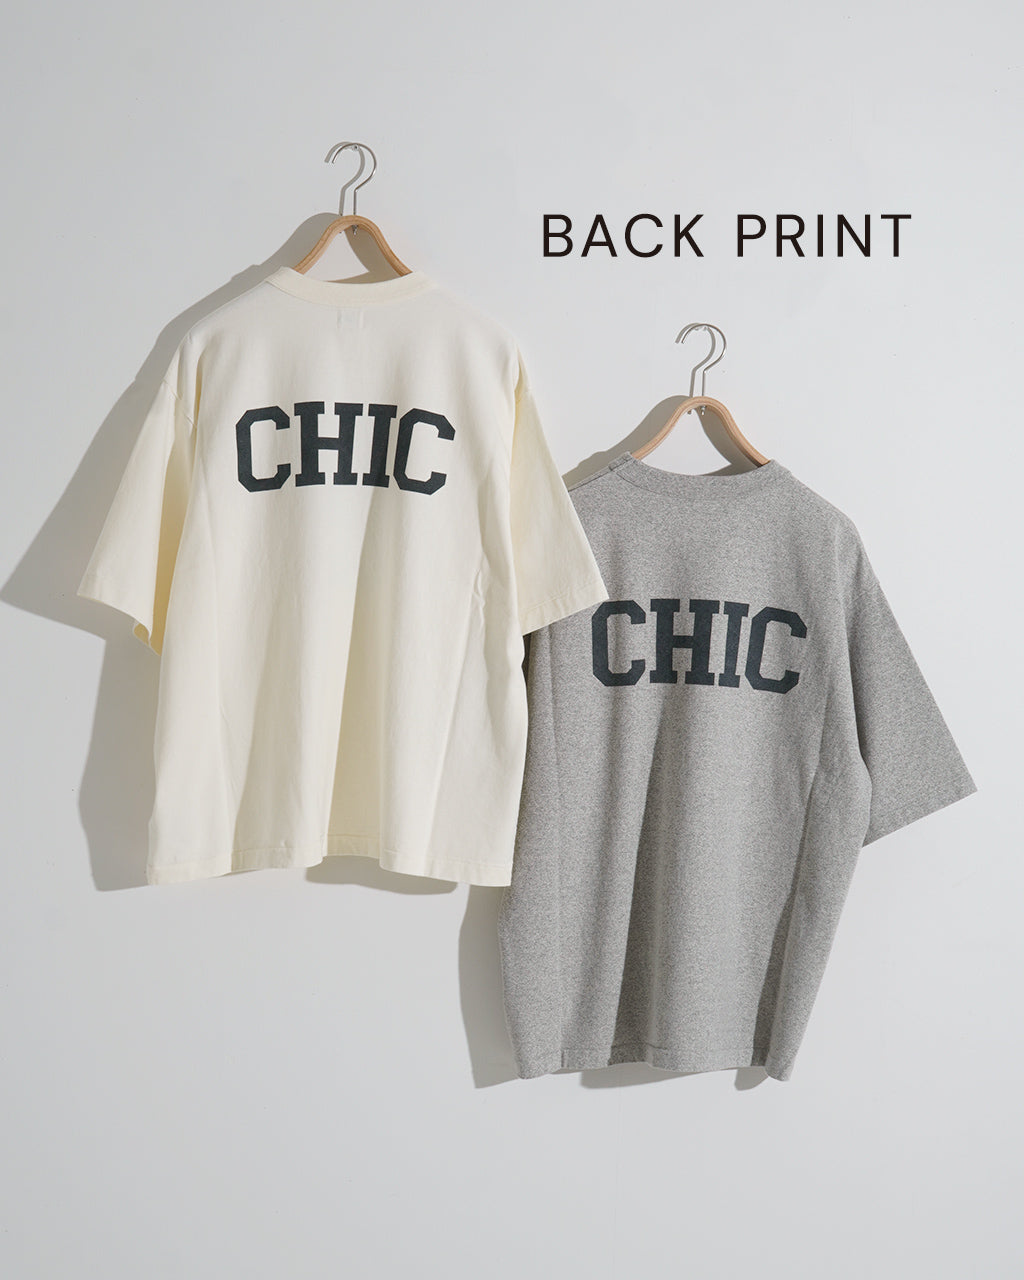 blurhms ROOTSTOCK ブラームス ルーツストック プリント Tシャツ ワイド CHIC-AGO 88/12 Print Tee WIDE【送料無料】正規取扱店